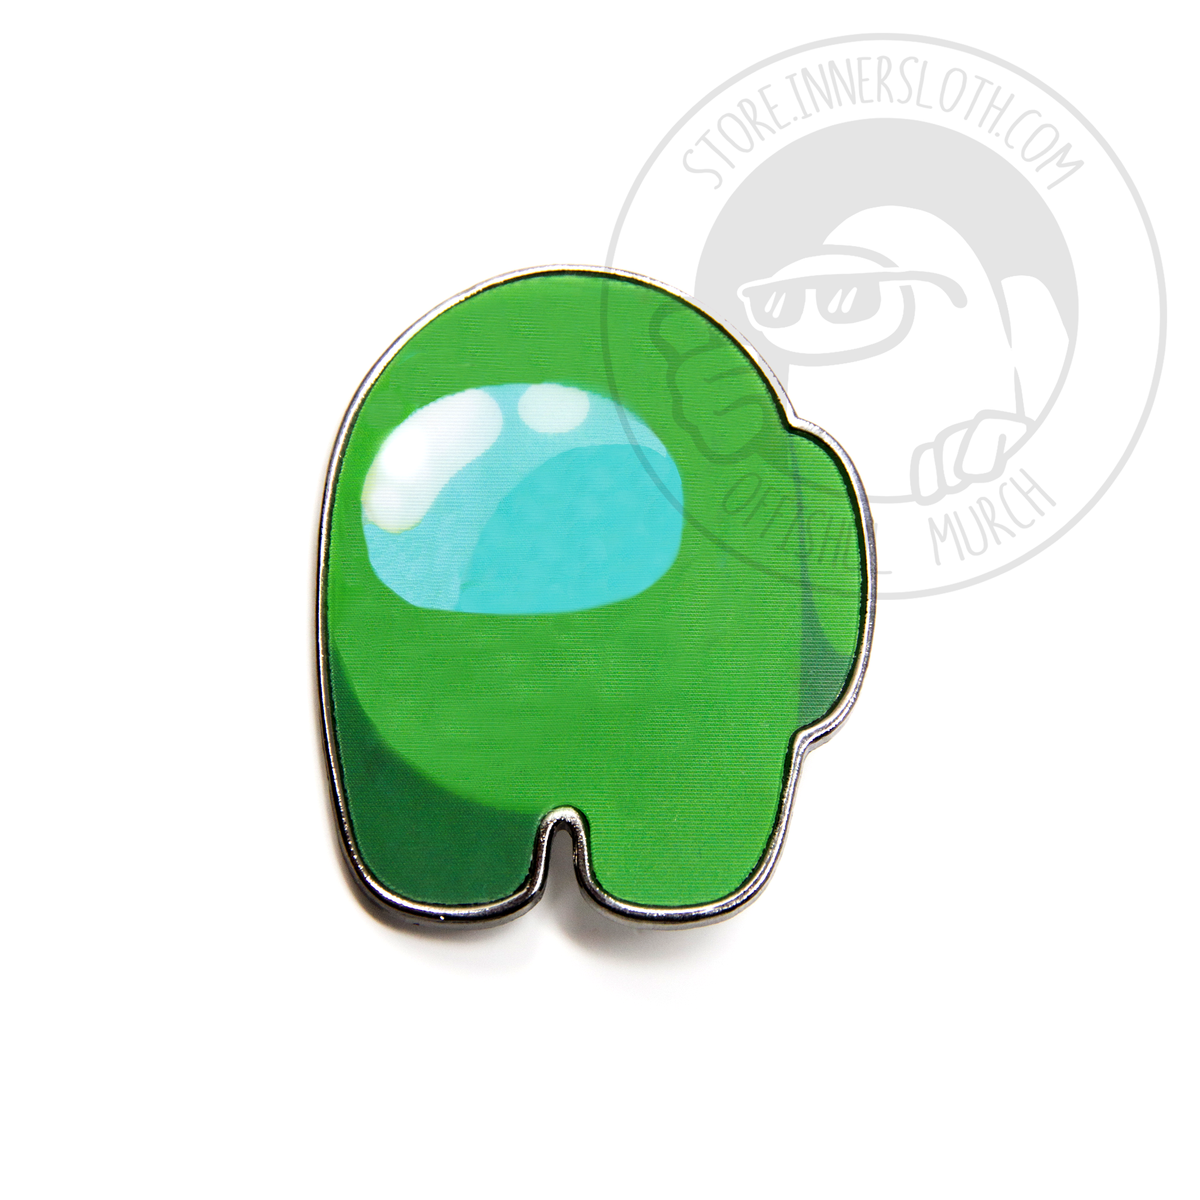 Among Us: Lenticular Crewmate Pin - Green by Noble Demons